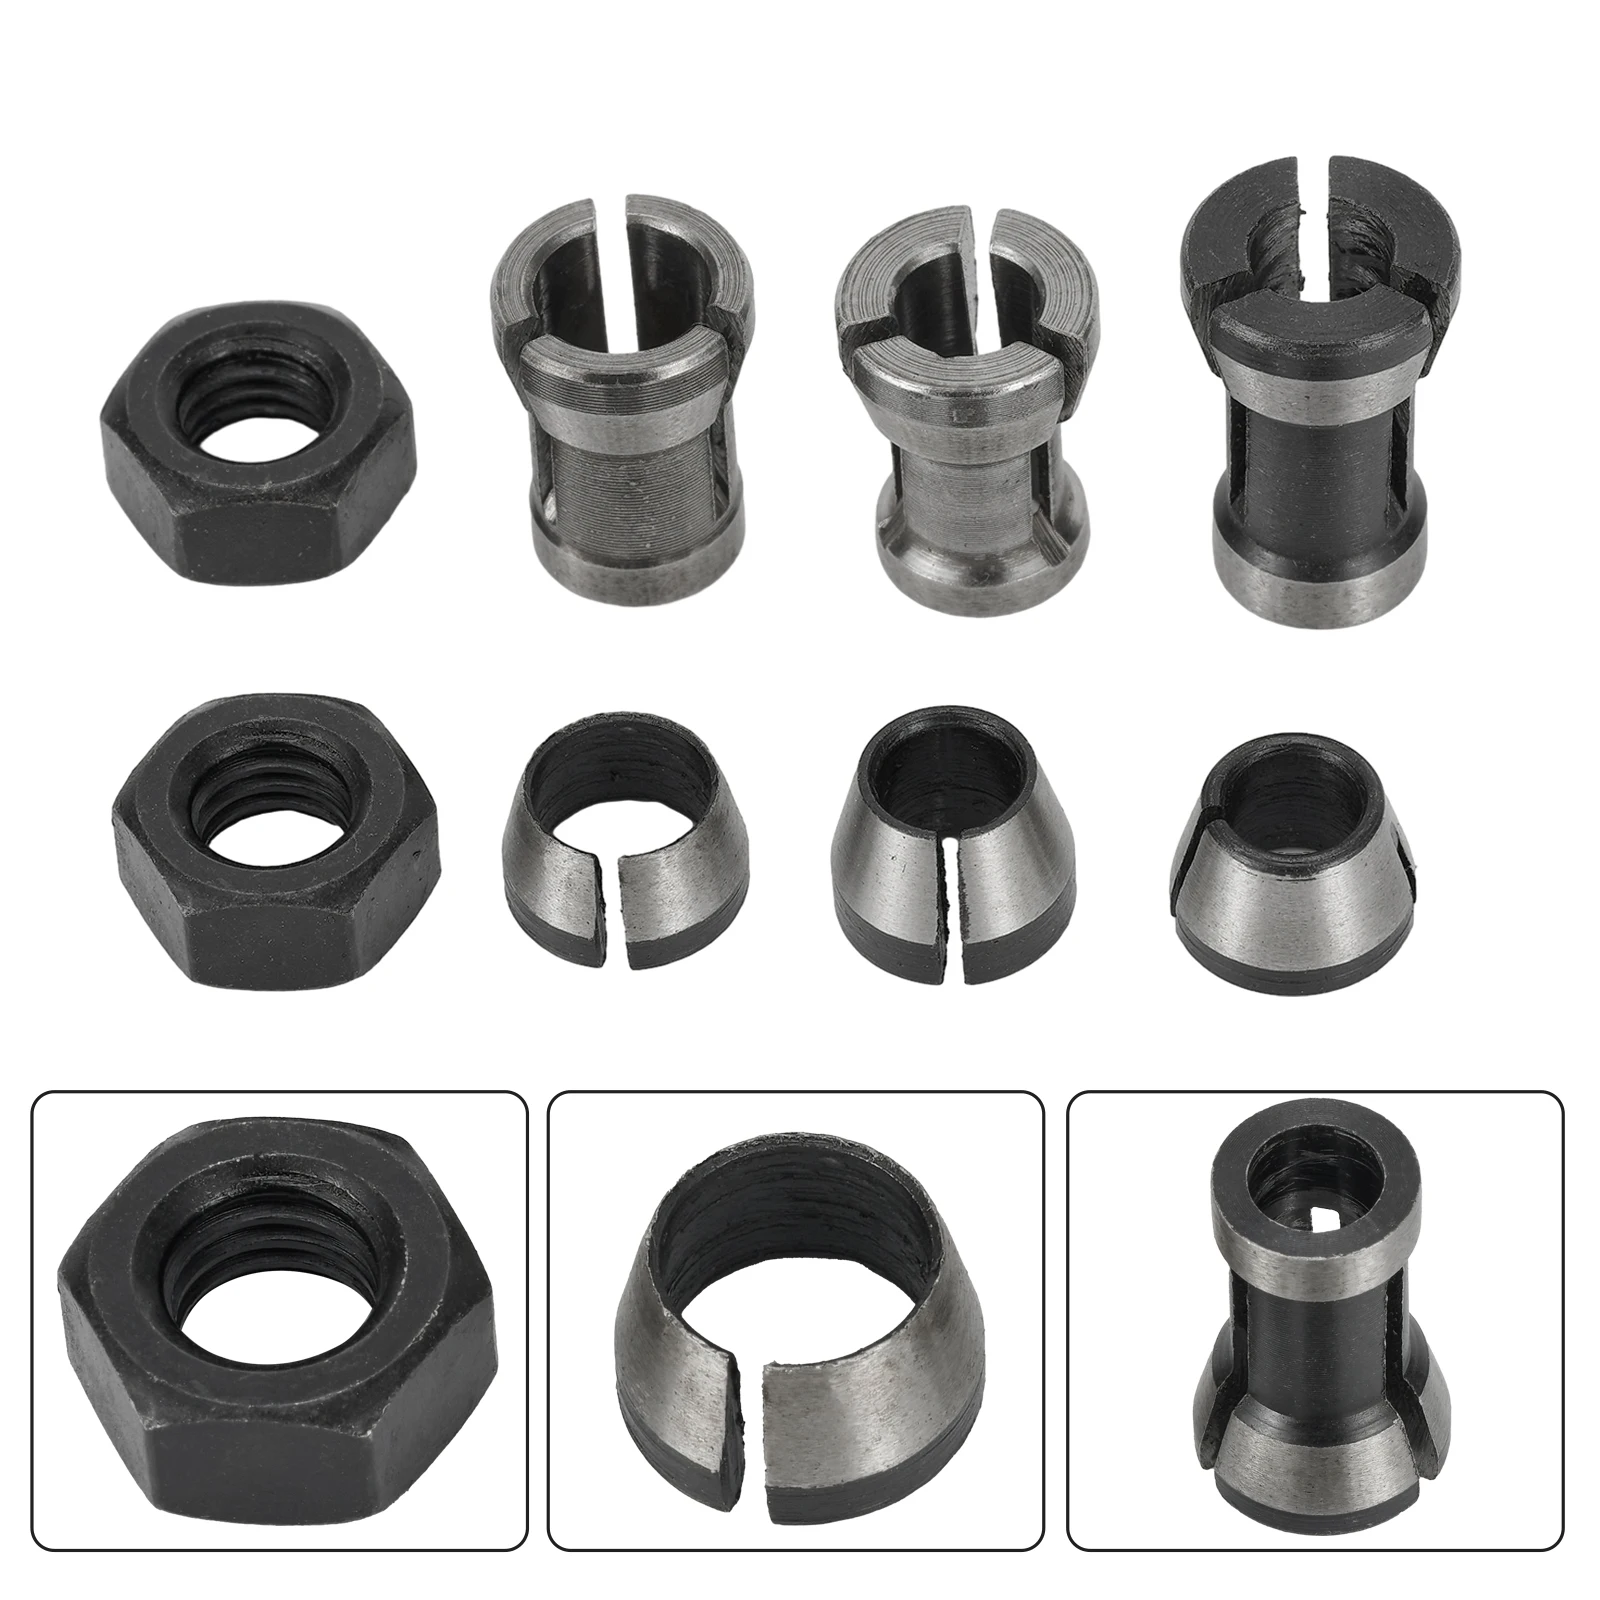 

8pcs Router Bit CNC Collet Chuck Adapter 6/6.35/8mm Engraving Trimming Machine Milling Cutter Woodworking Power Tools Parts